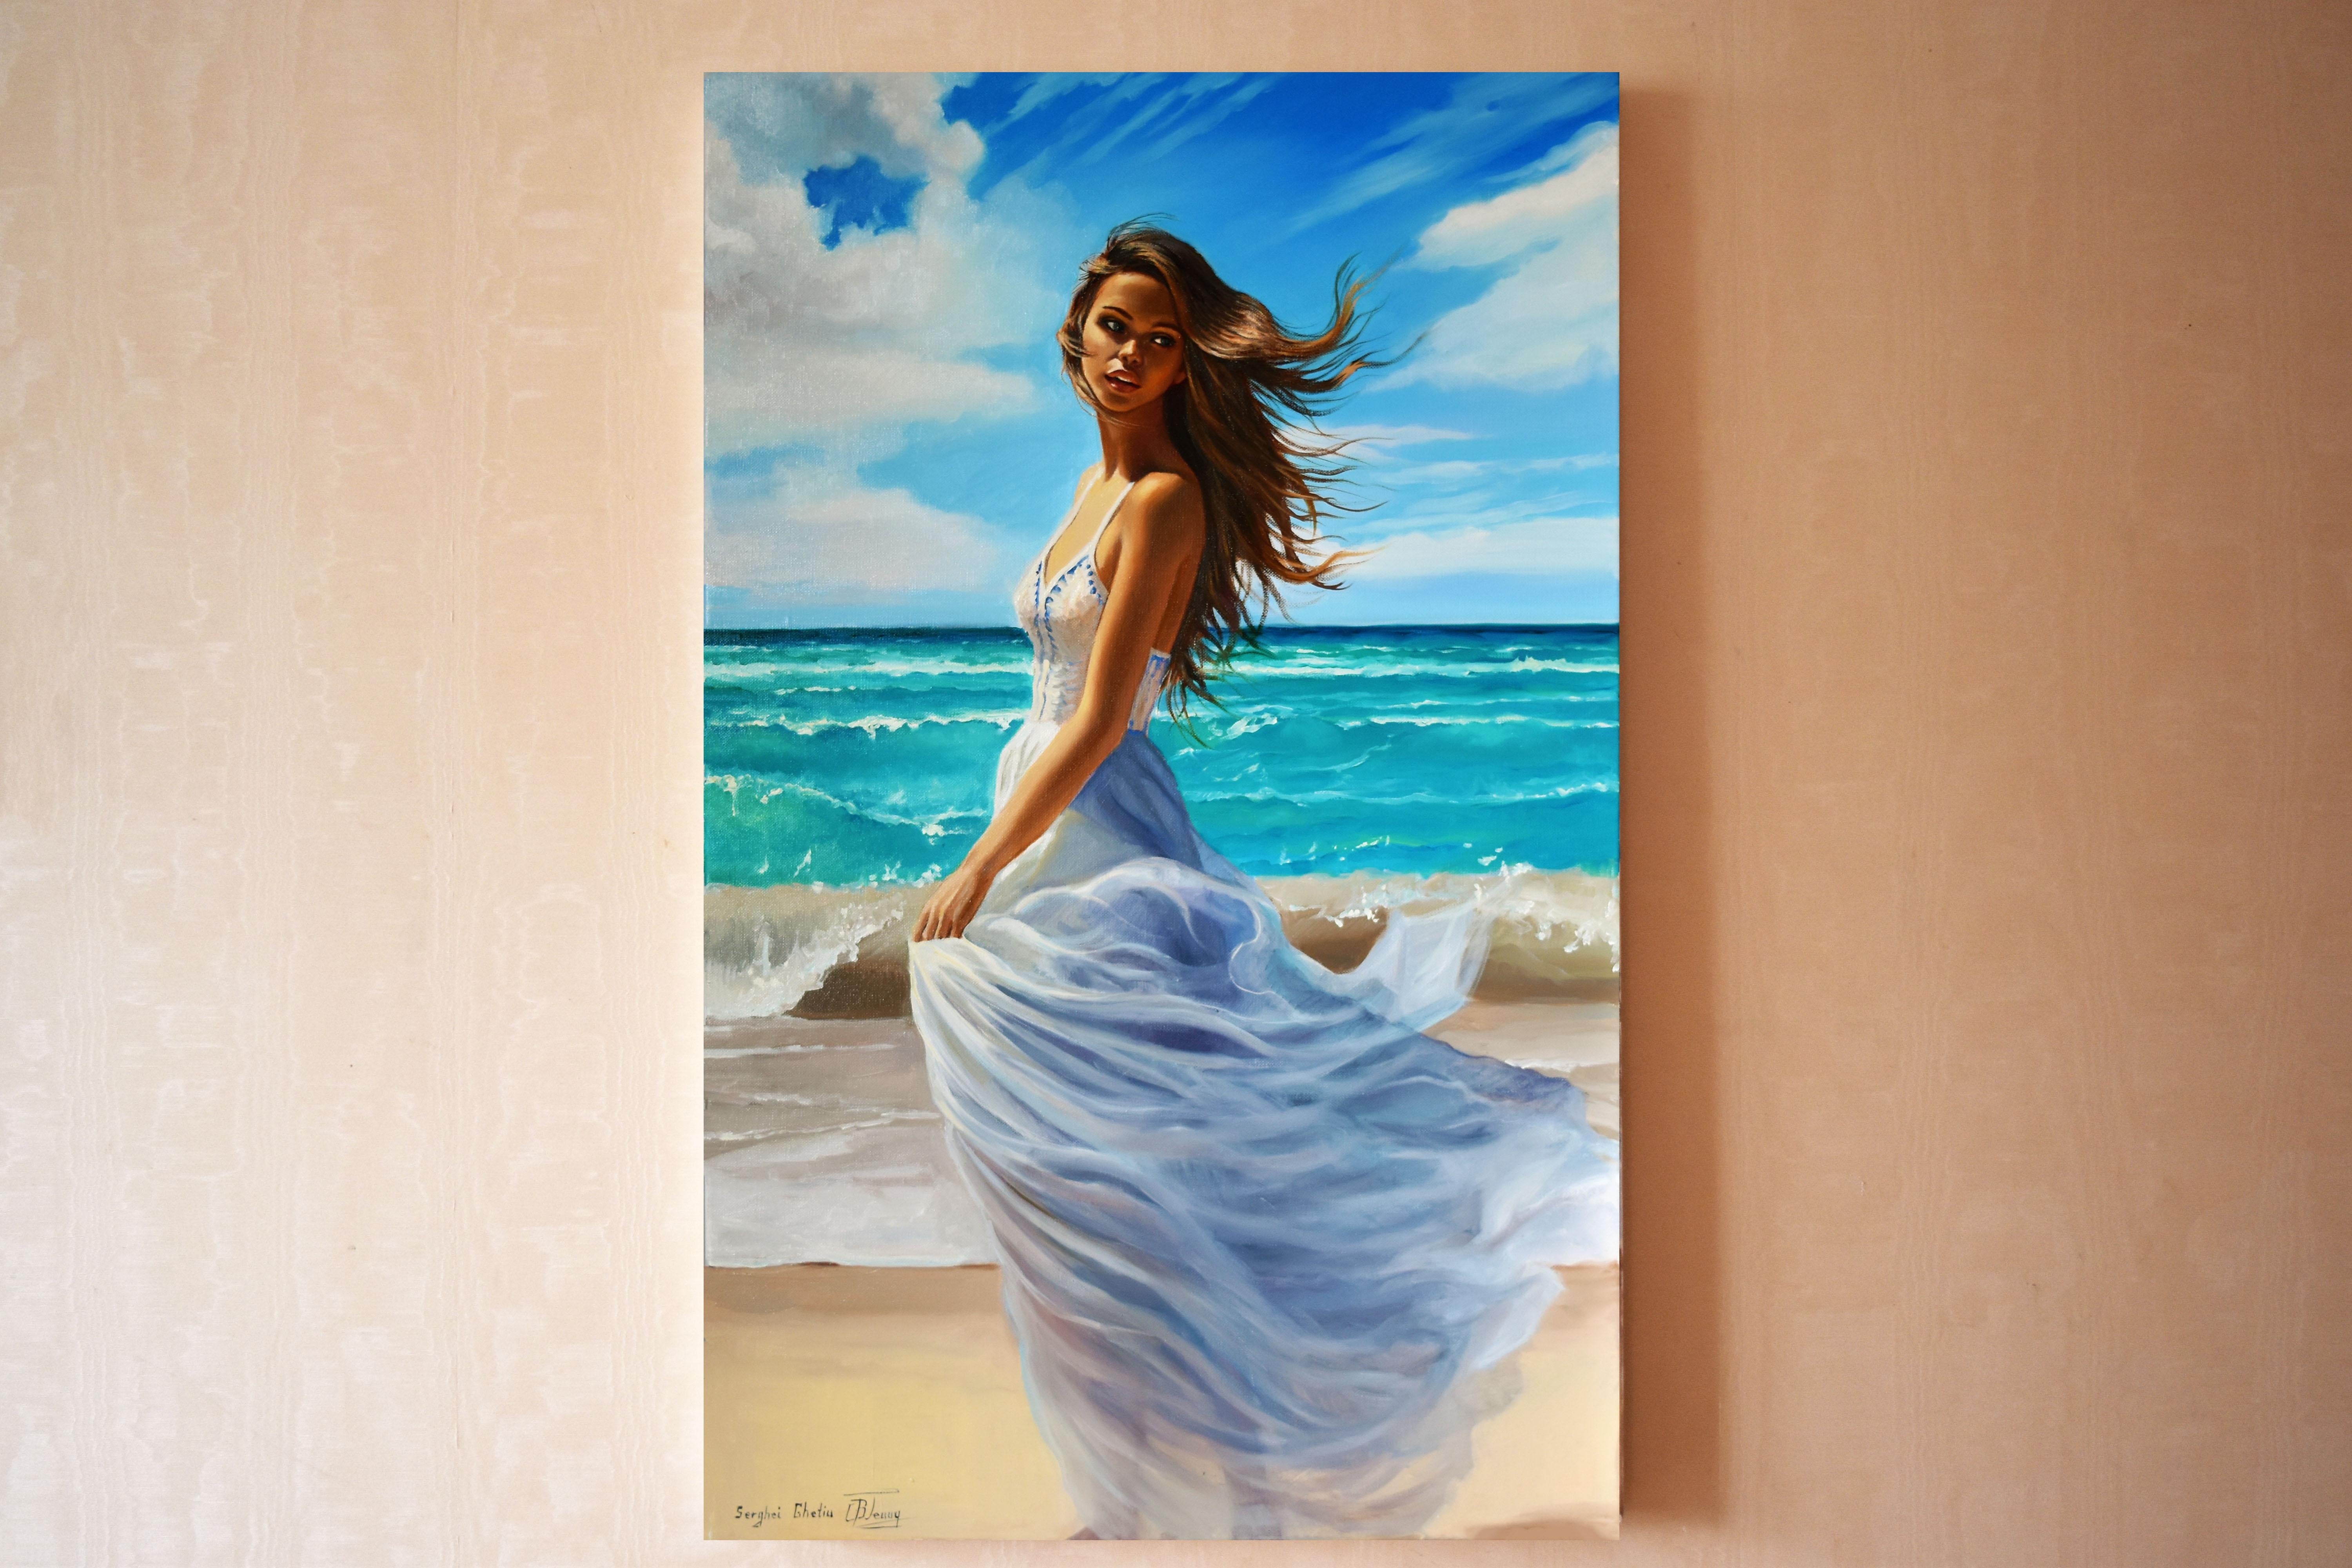 Sunny contrasting girl portrait at the sea coast. The beautiful sea waves crushing on the coast. The sea wind is playing with hair. An artwork which brings summer and sea in to your home all year round. Professional paints on linen canvas.